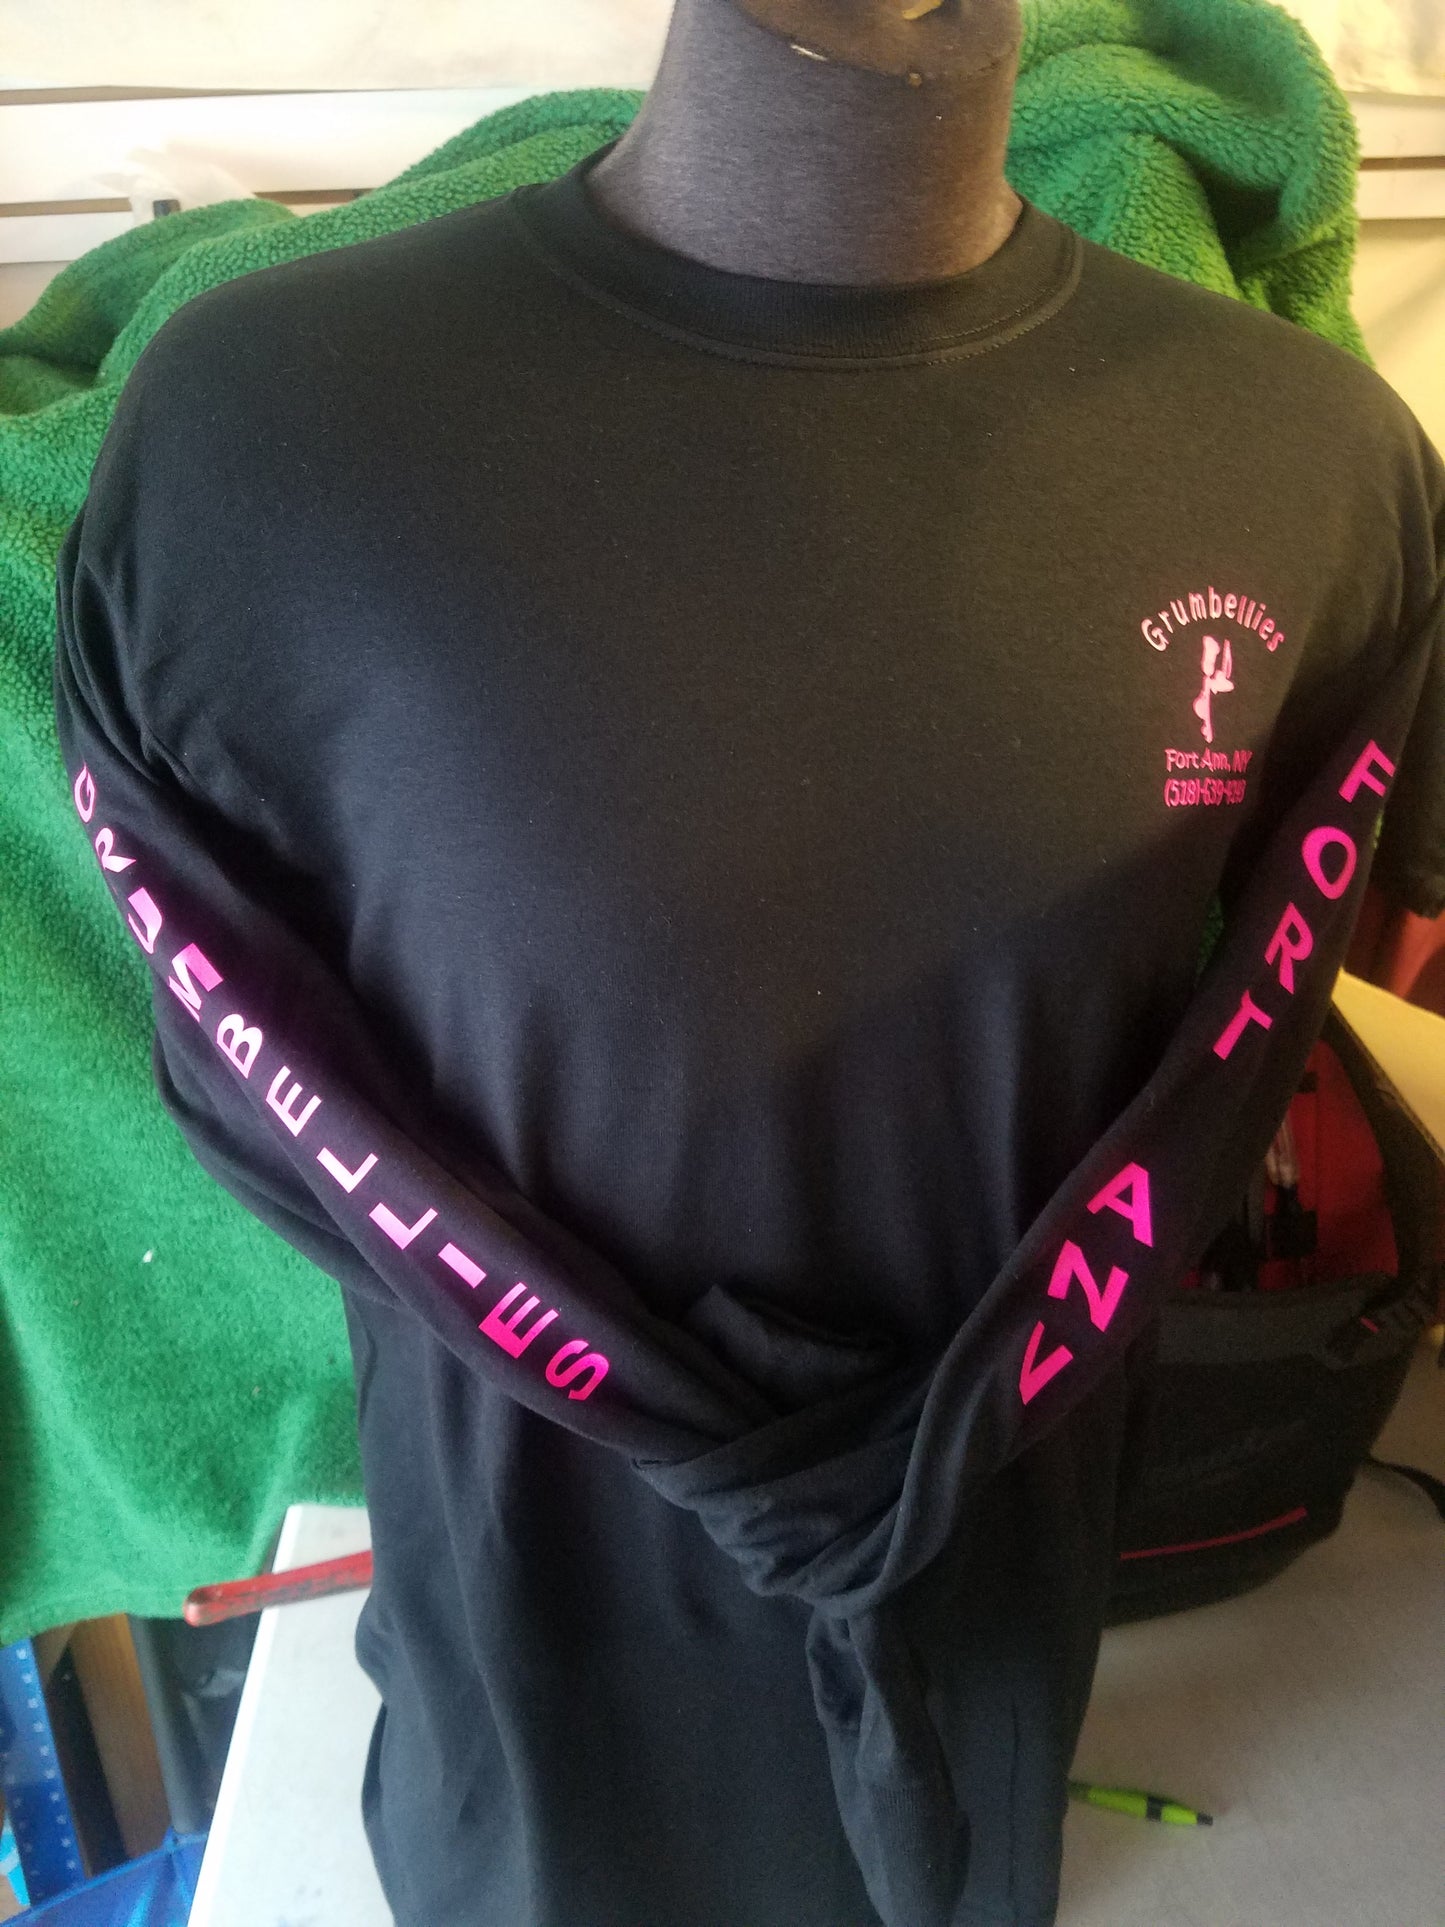 Copy of Grumbellies Black Long Sleeve with Hot Pink Lettering